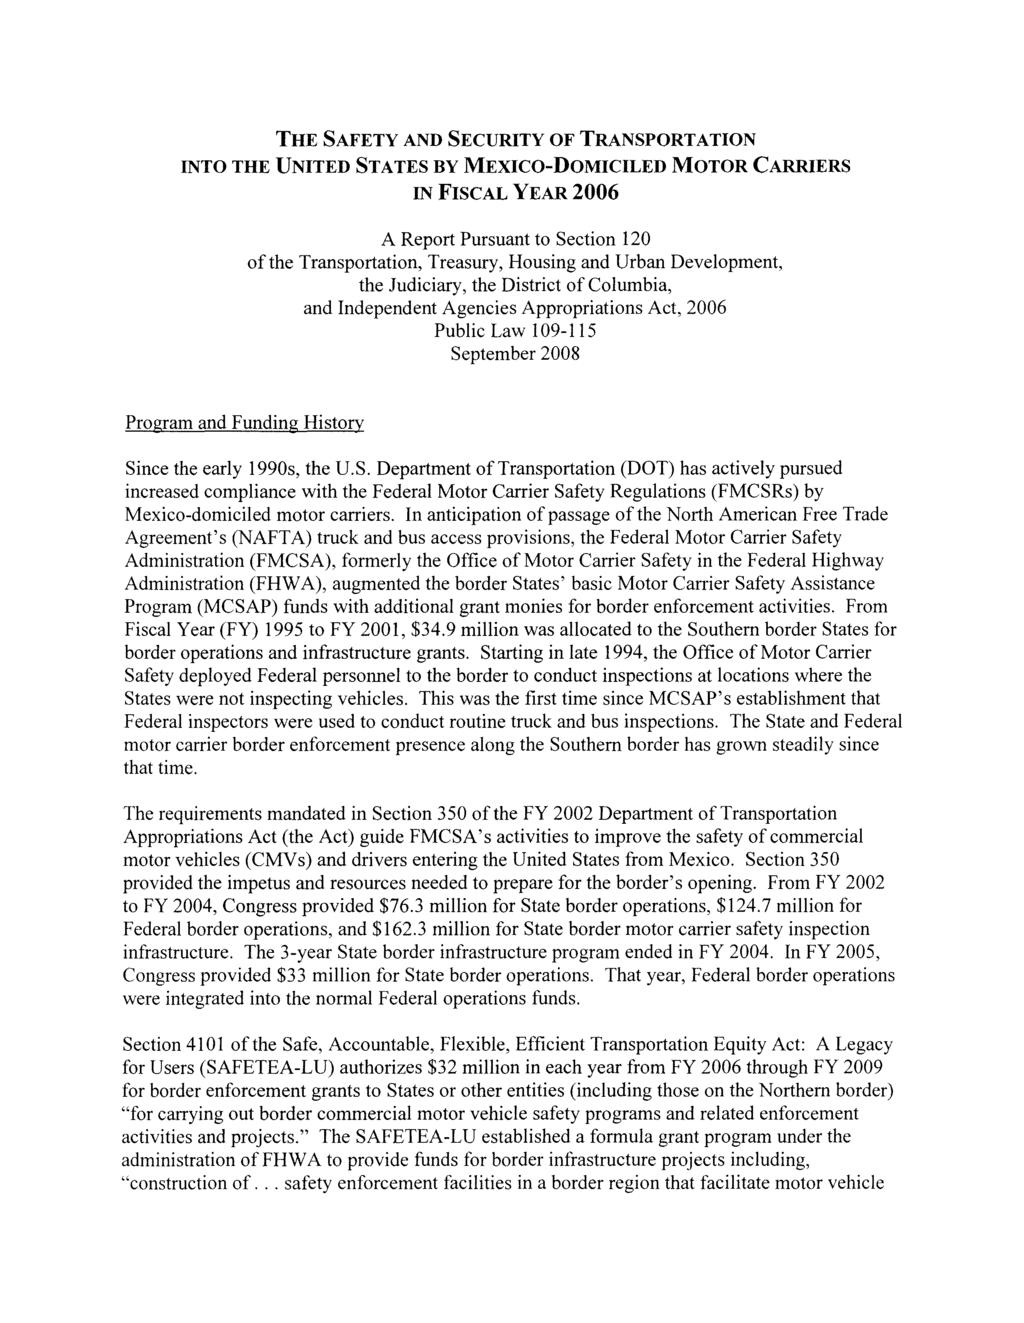 THE SAFETY AND SECURITY OF TRANSPORTATION INTO THE UNITED STATES BY MEXICO-DOMICILED MOTOR CARRIERS IN FISCAL YEAR 2006 A Report Pursuant to Section 120 of the Transportation, Treasury, Housing and